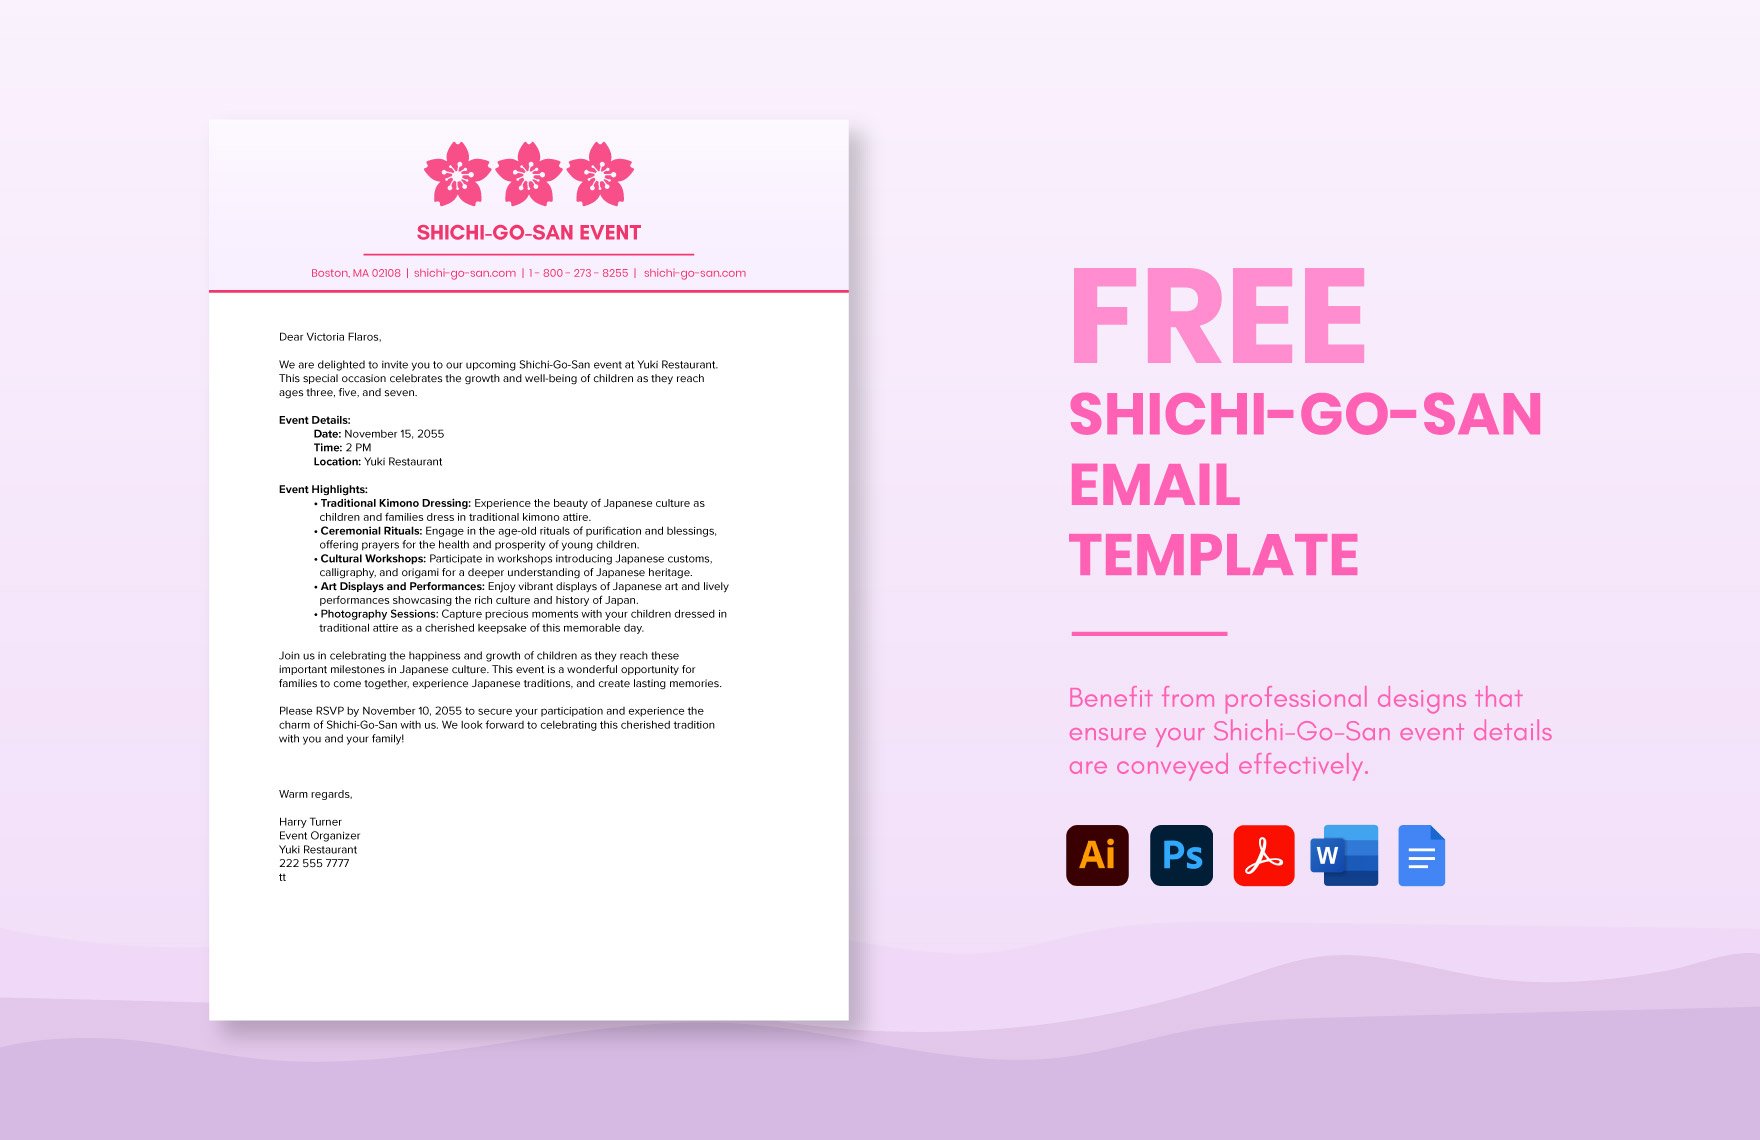 Shichi-Go-San Email Template